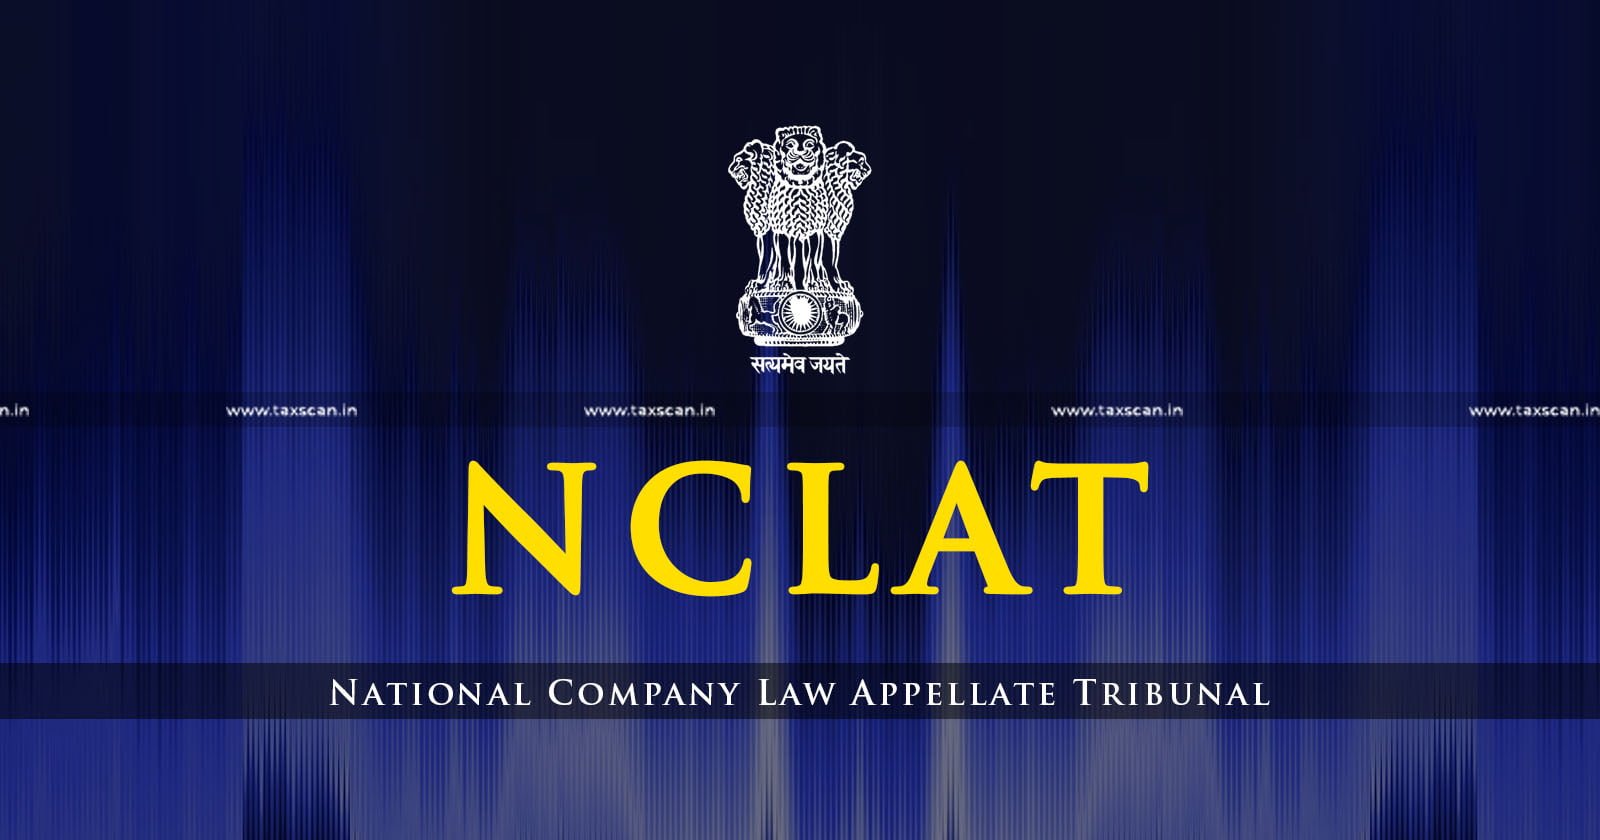 RP - Entitled - Sum - Received- Since -Insolvency -Withdrawn-NCLAT-TAXSCAN